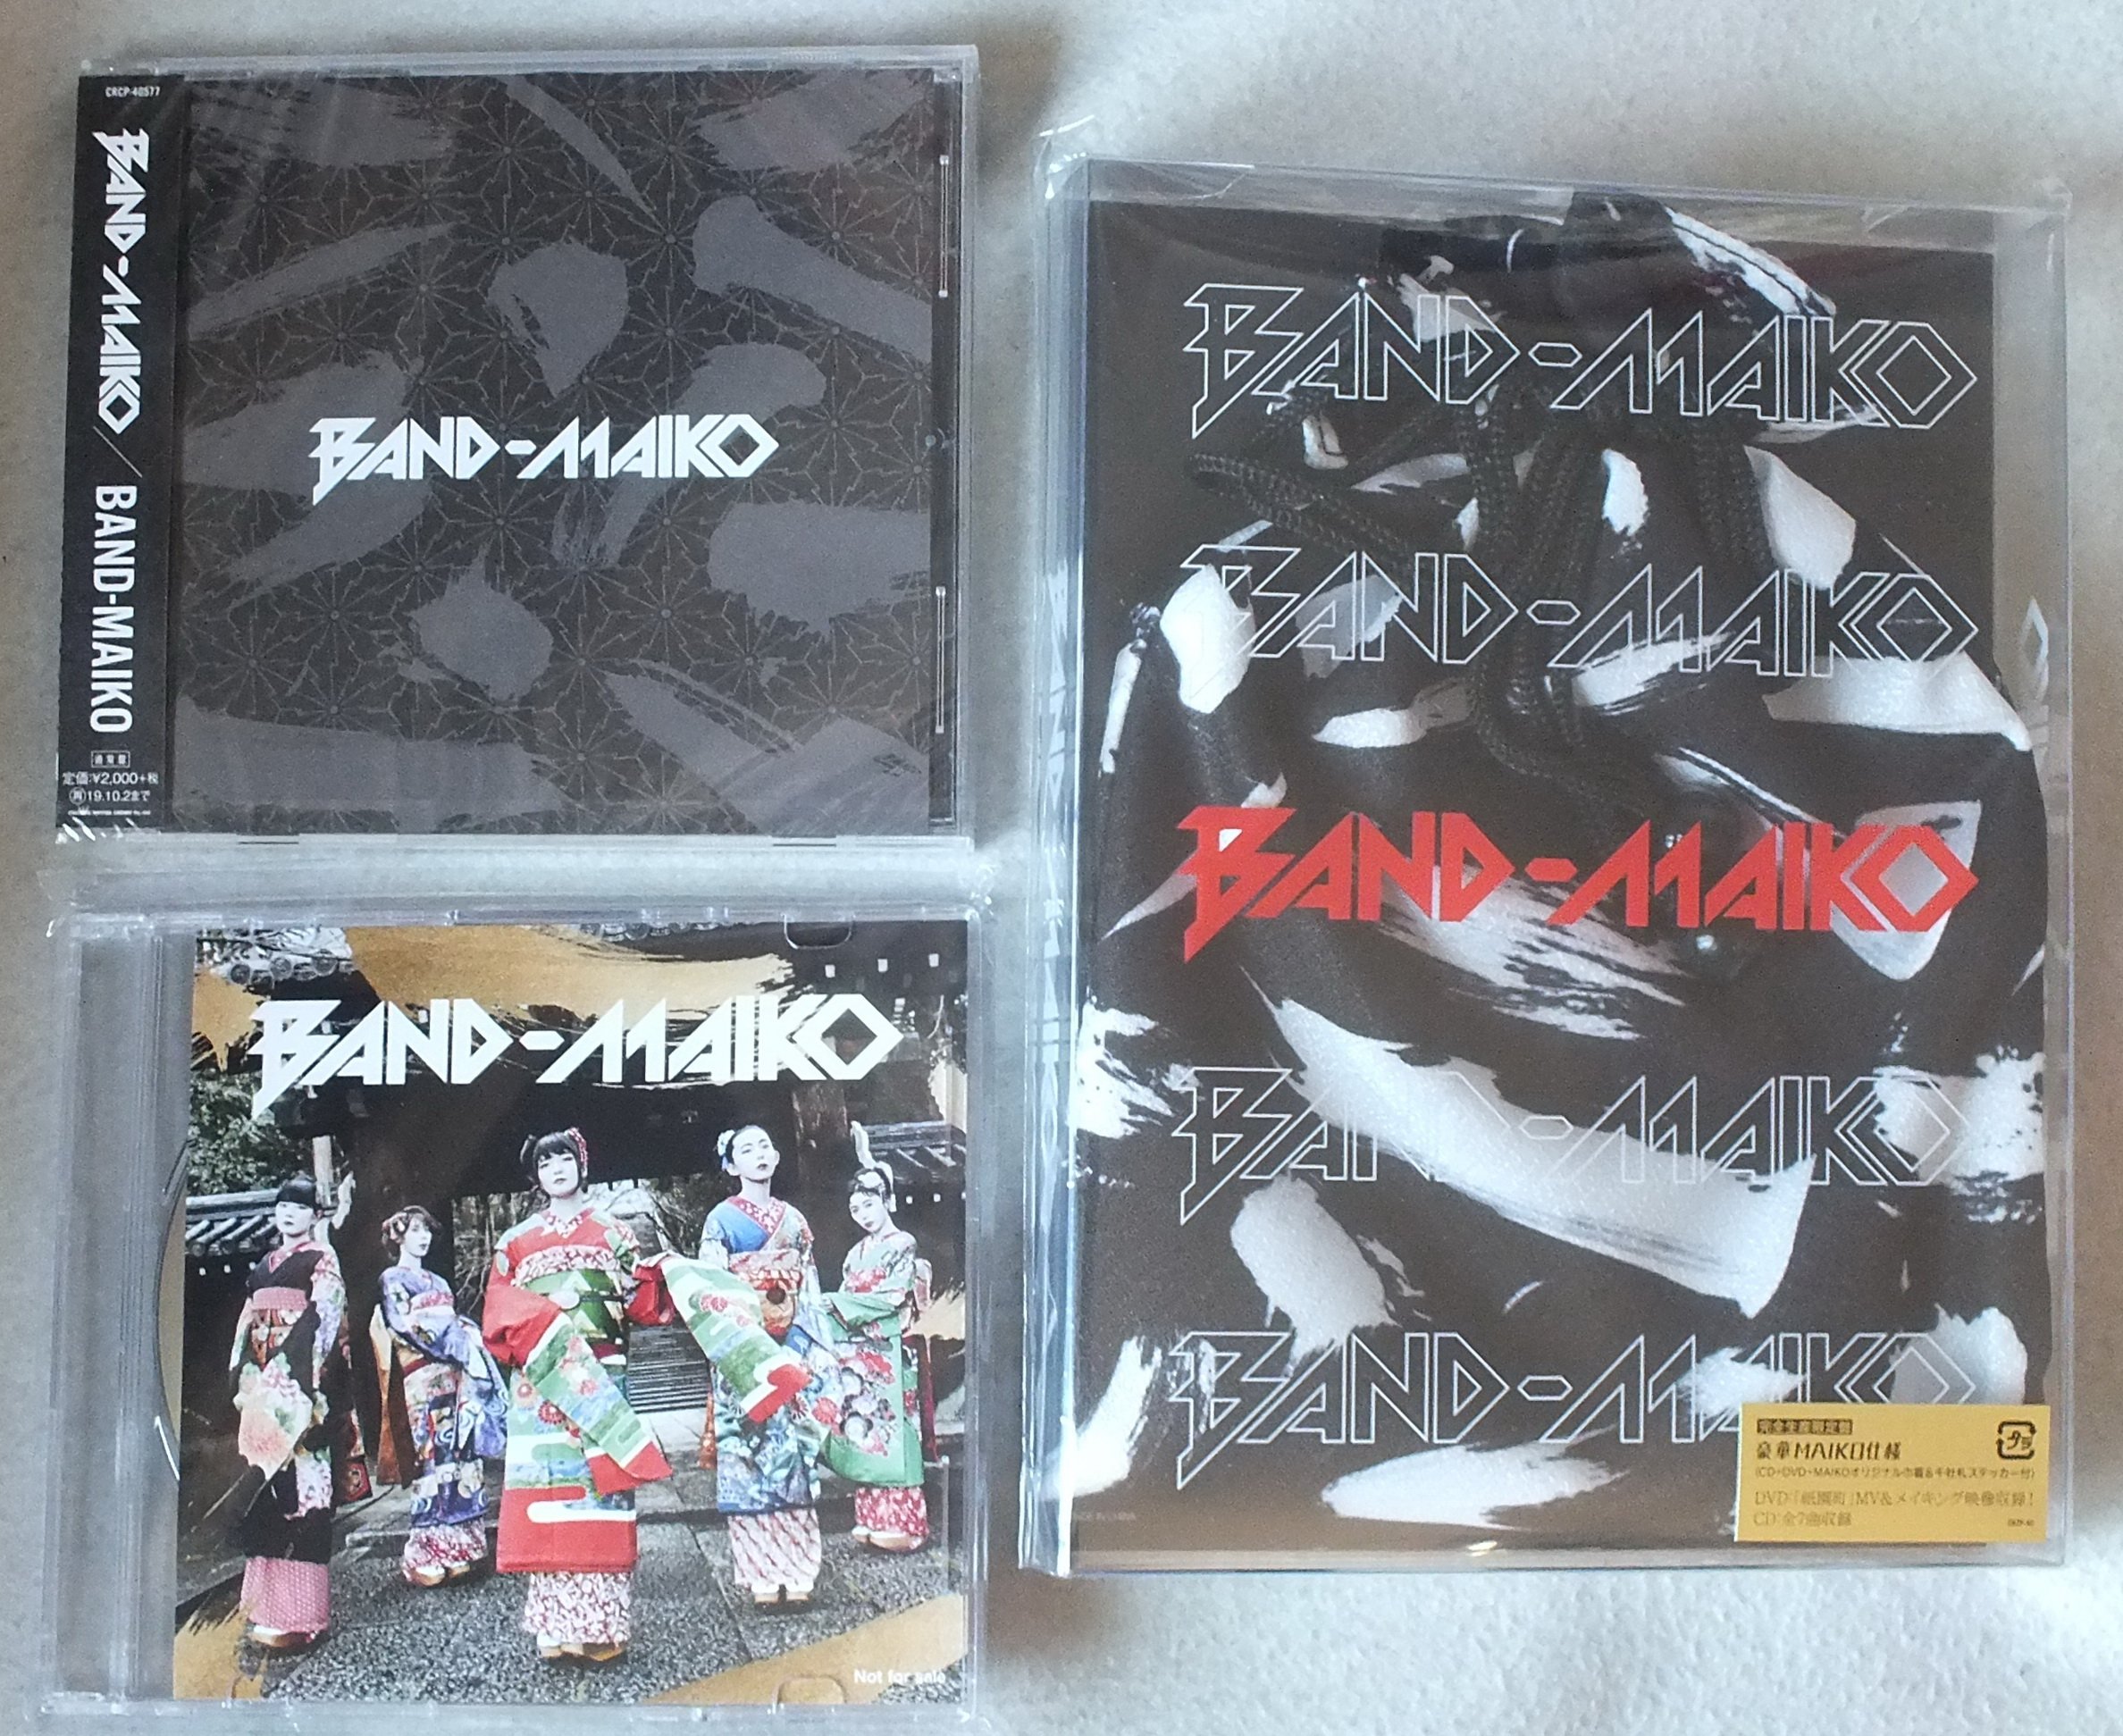 Dmitrij New Band Maid Album Delivered It S Band Maiko Regular Edition Gionmachi Making Of Music Video Another Version Band Maiko W Dvd Limited Edition Bandmaid Bandmaiko T Co 3urgj3w0to Twitter